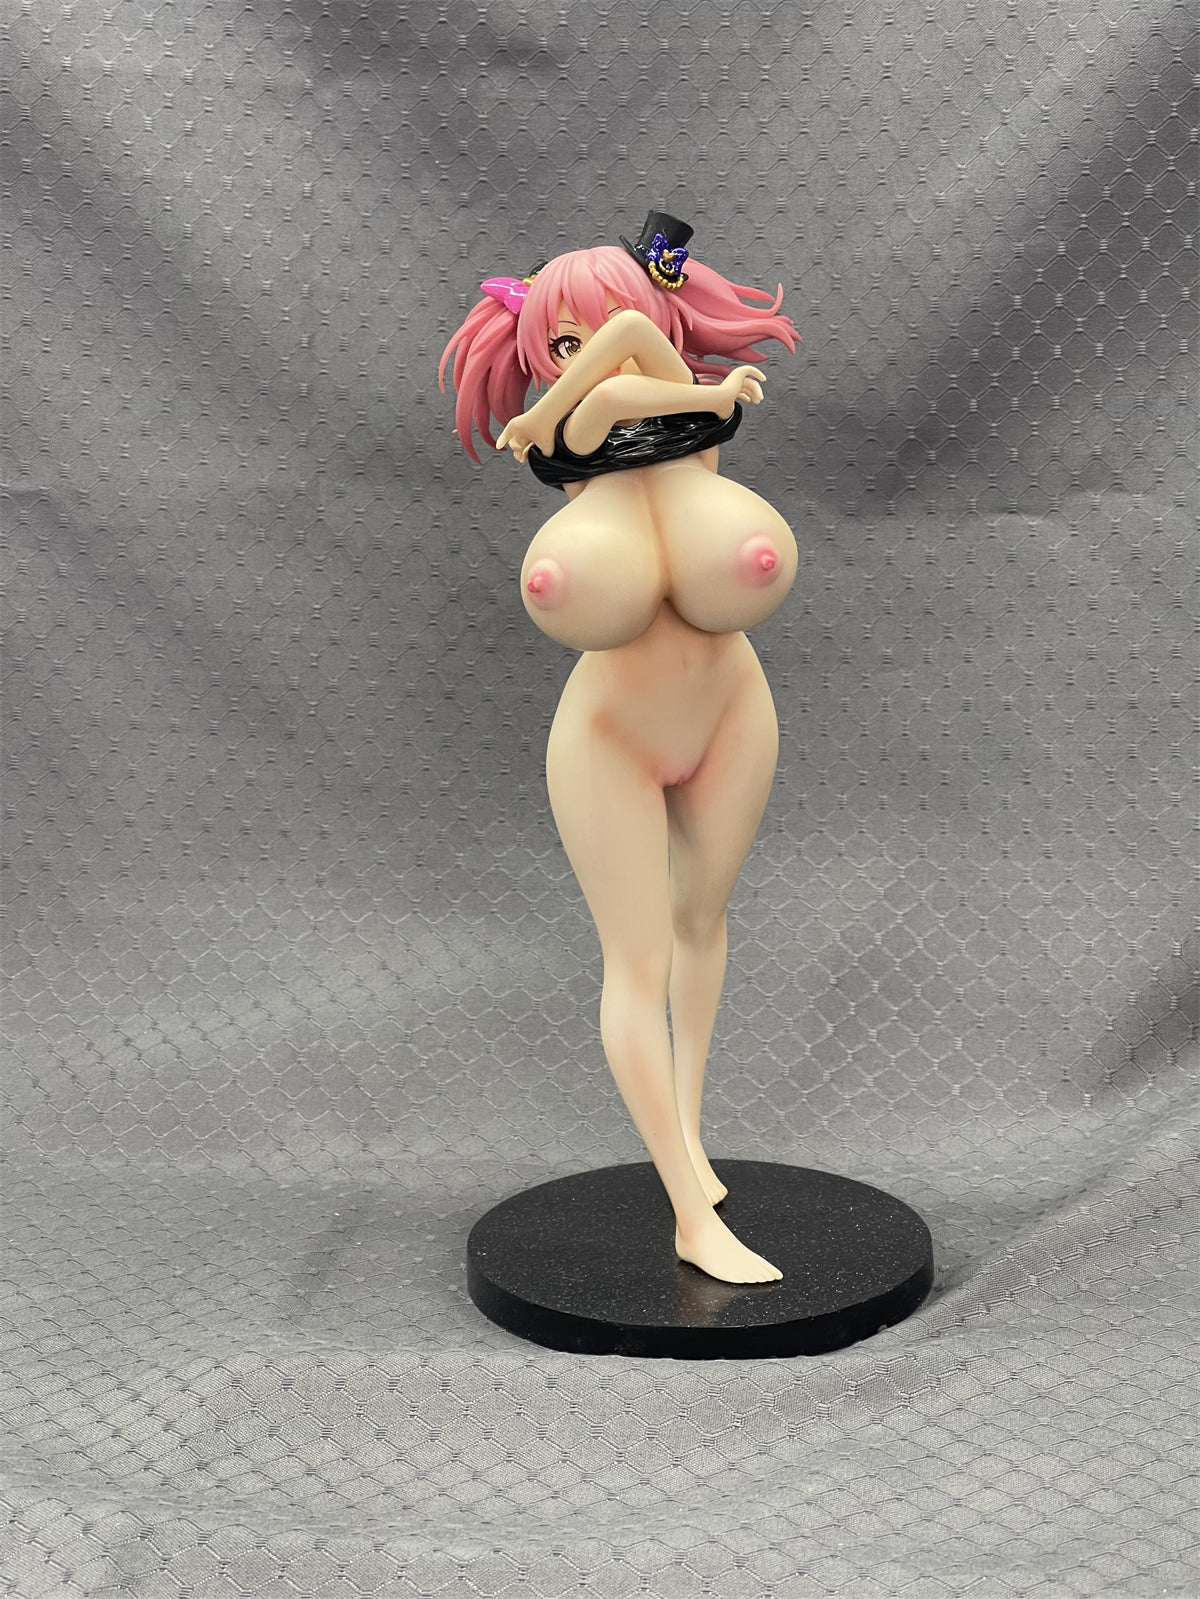 THE iDOLM@STER Cinderella Girls - Jougasaki Mika huge breast 1/6 naked anime figure sexy action figures